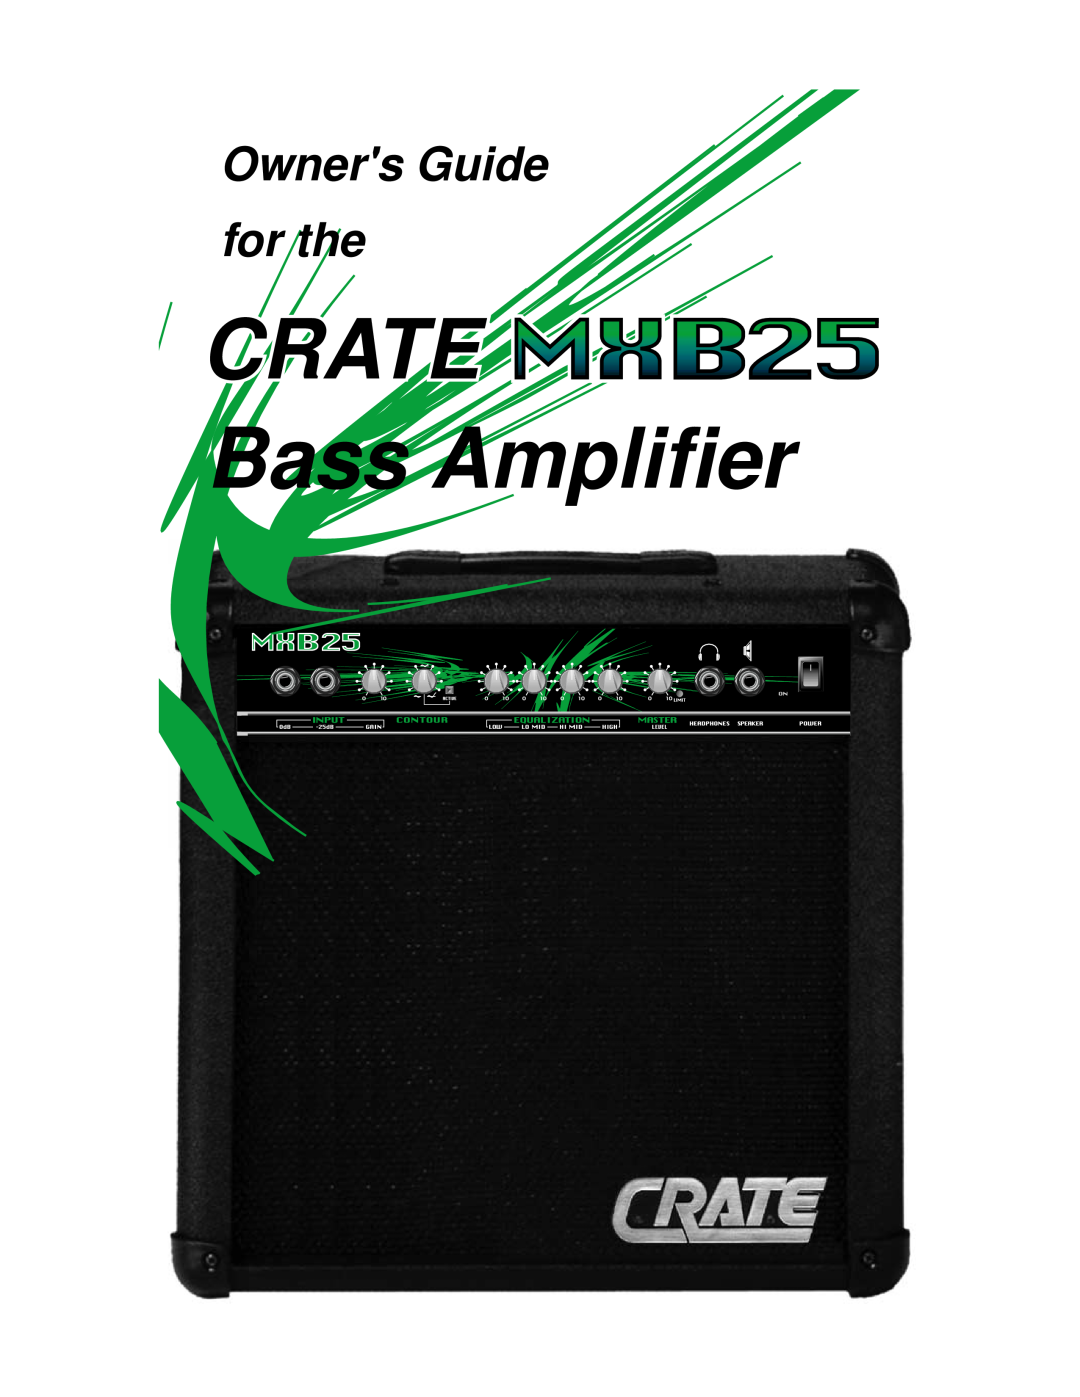 Crate Amplifiers MXB25 manual CRATE Bass Amplifier, Owners Guide for the 